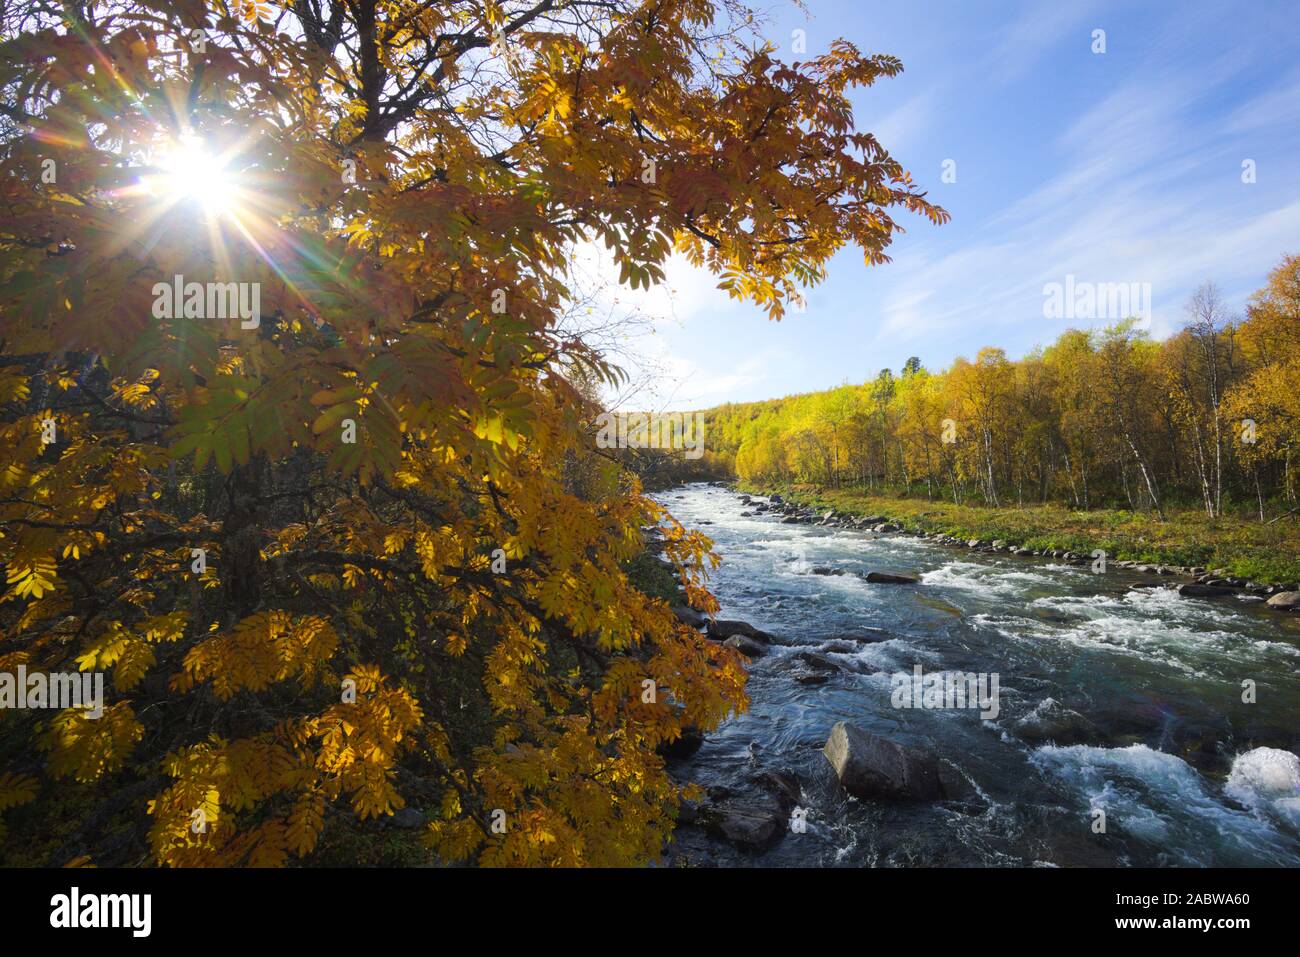 Sun through the trees at a river in autumn, Sweden Stock Photo